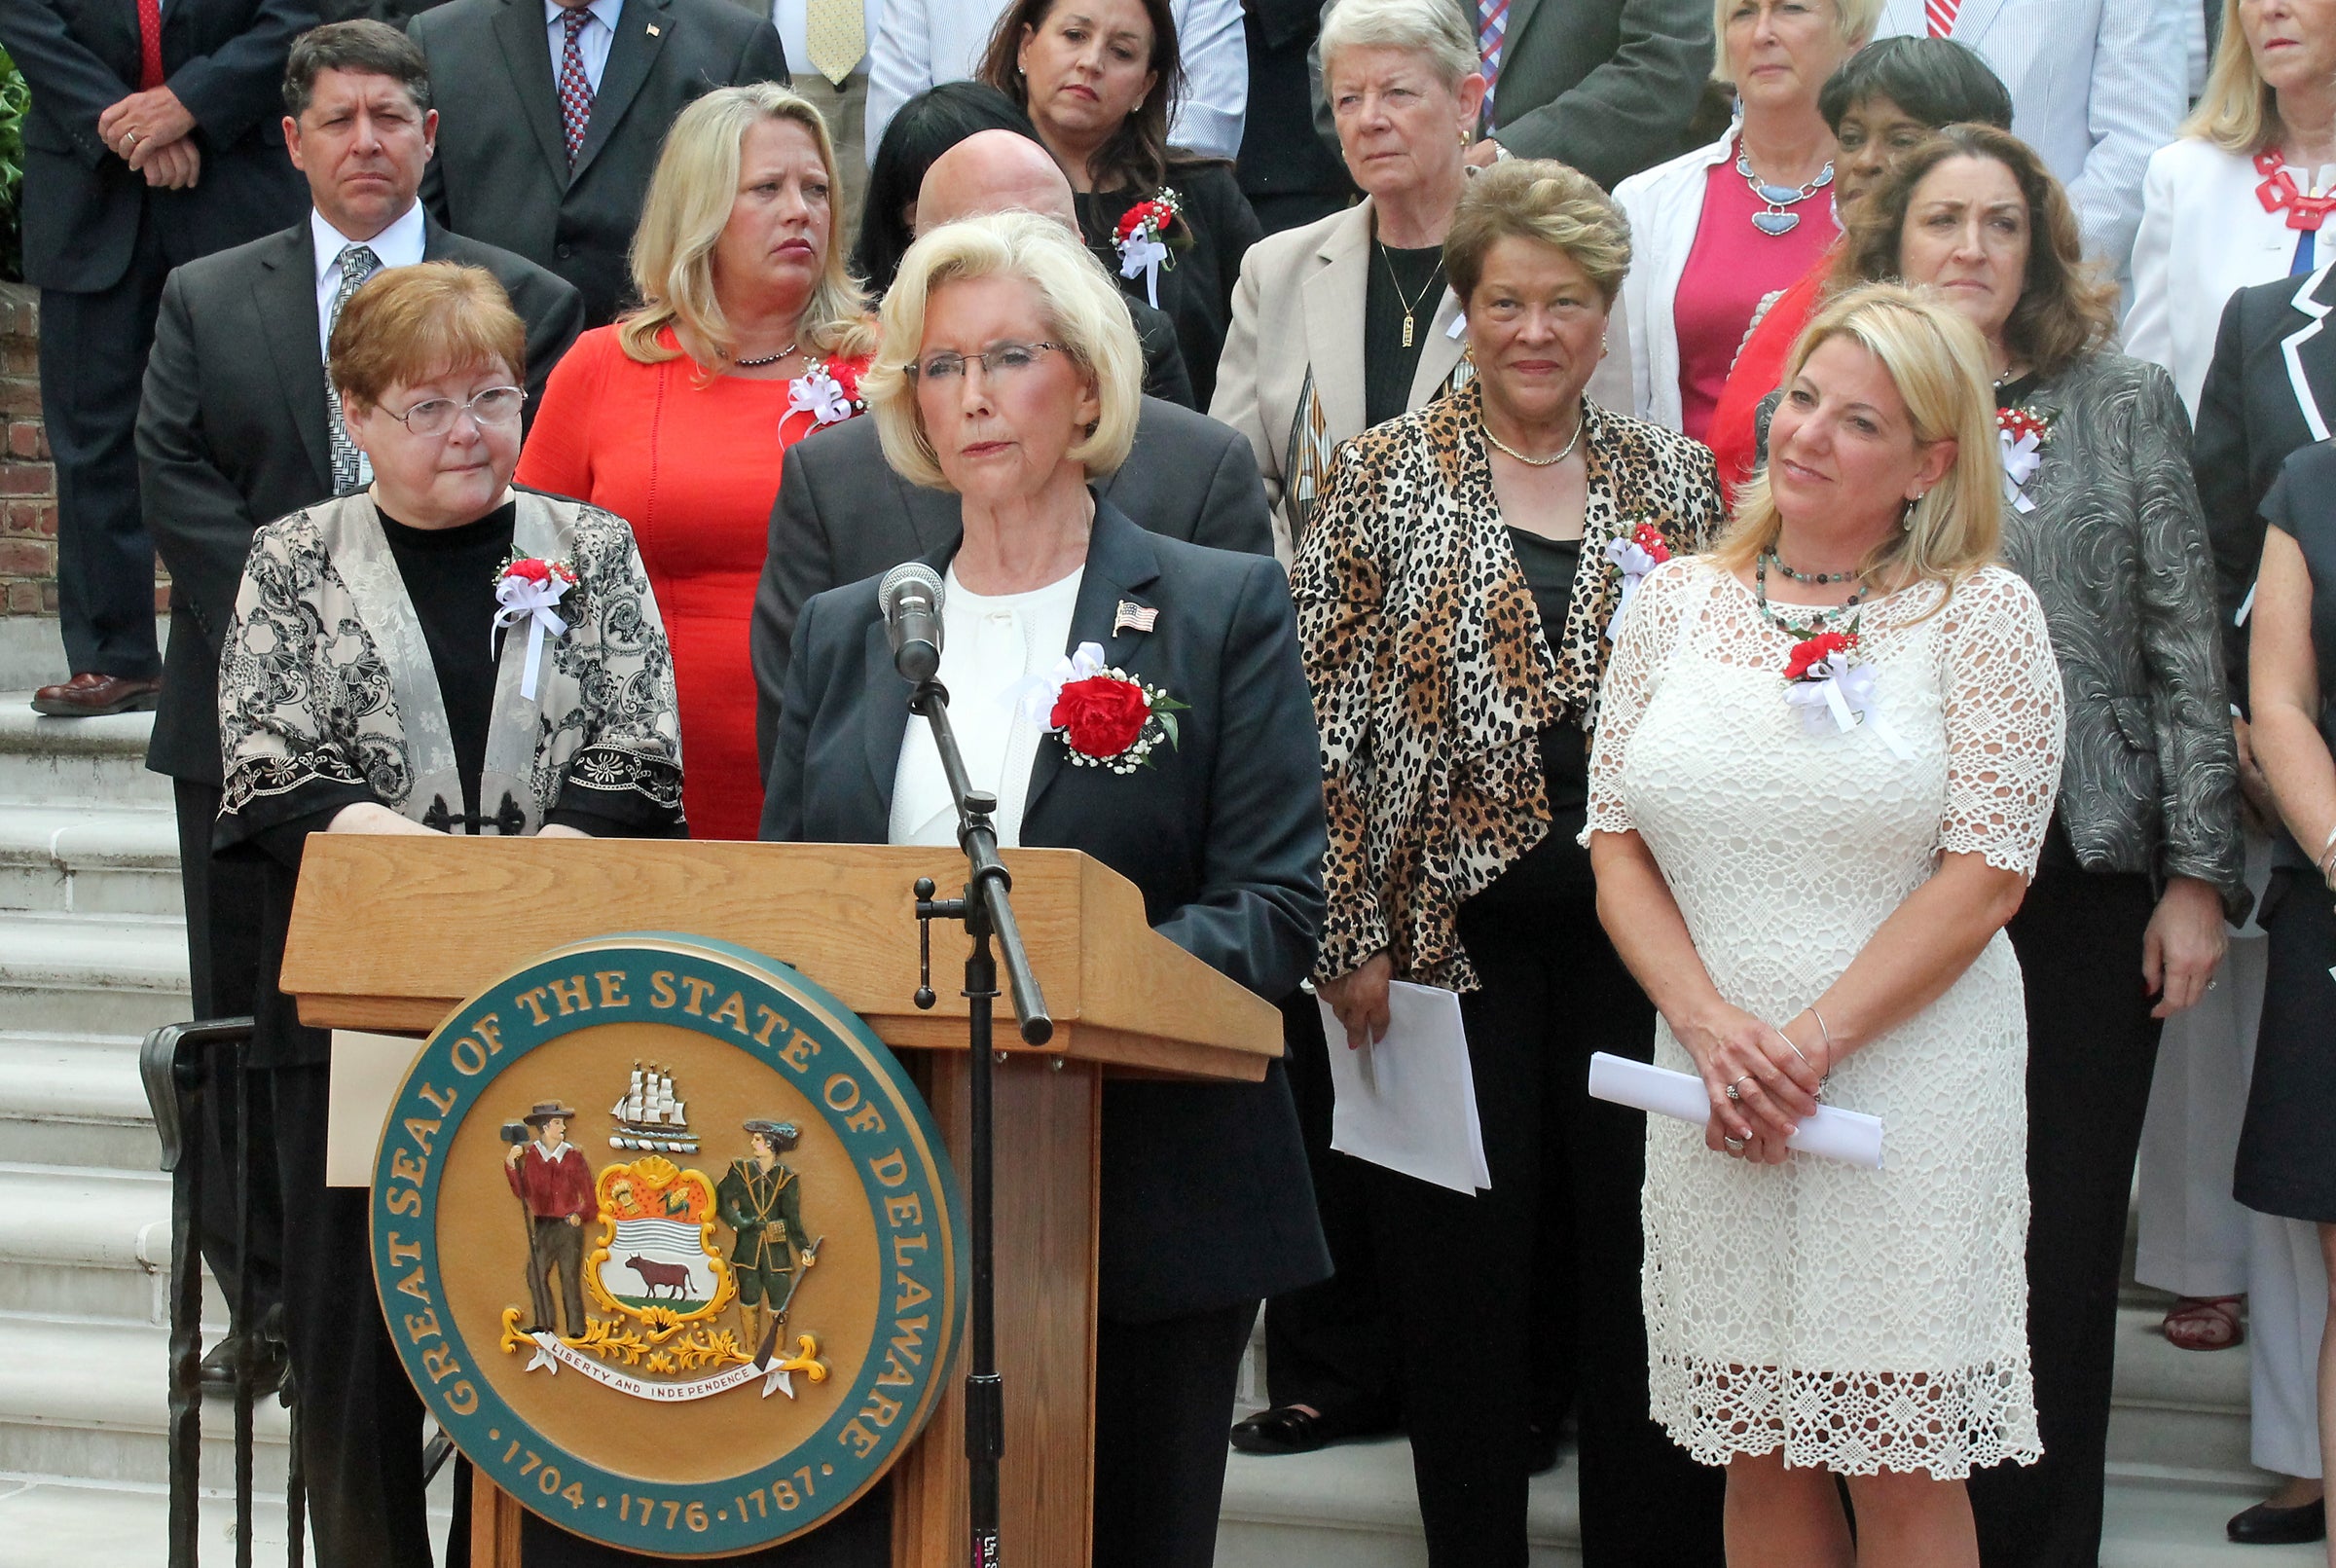 Women’s rights activist Lilly Ledbetter was the guest of honor during a signing of bills that aim to improve the lives of women. (Courtesy of Doug Denison)